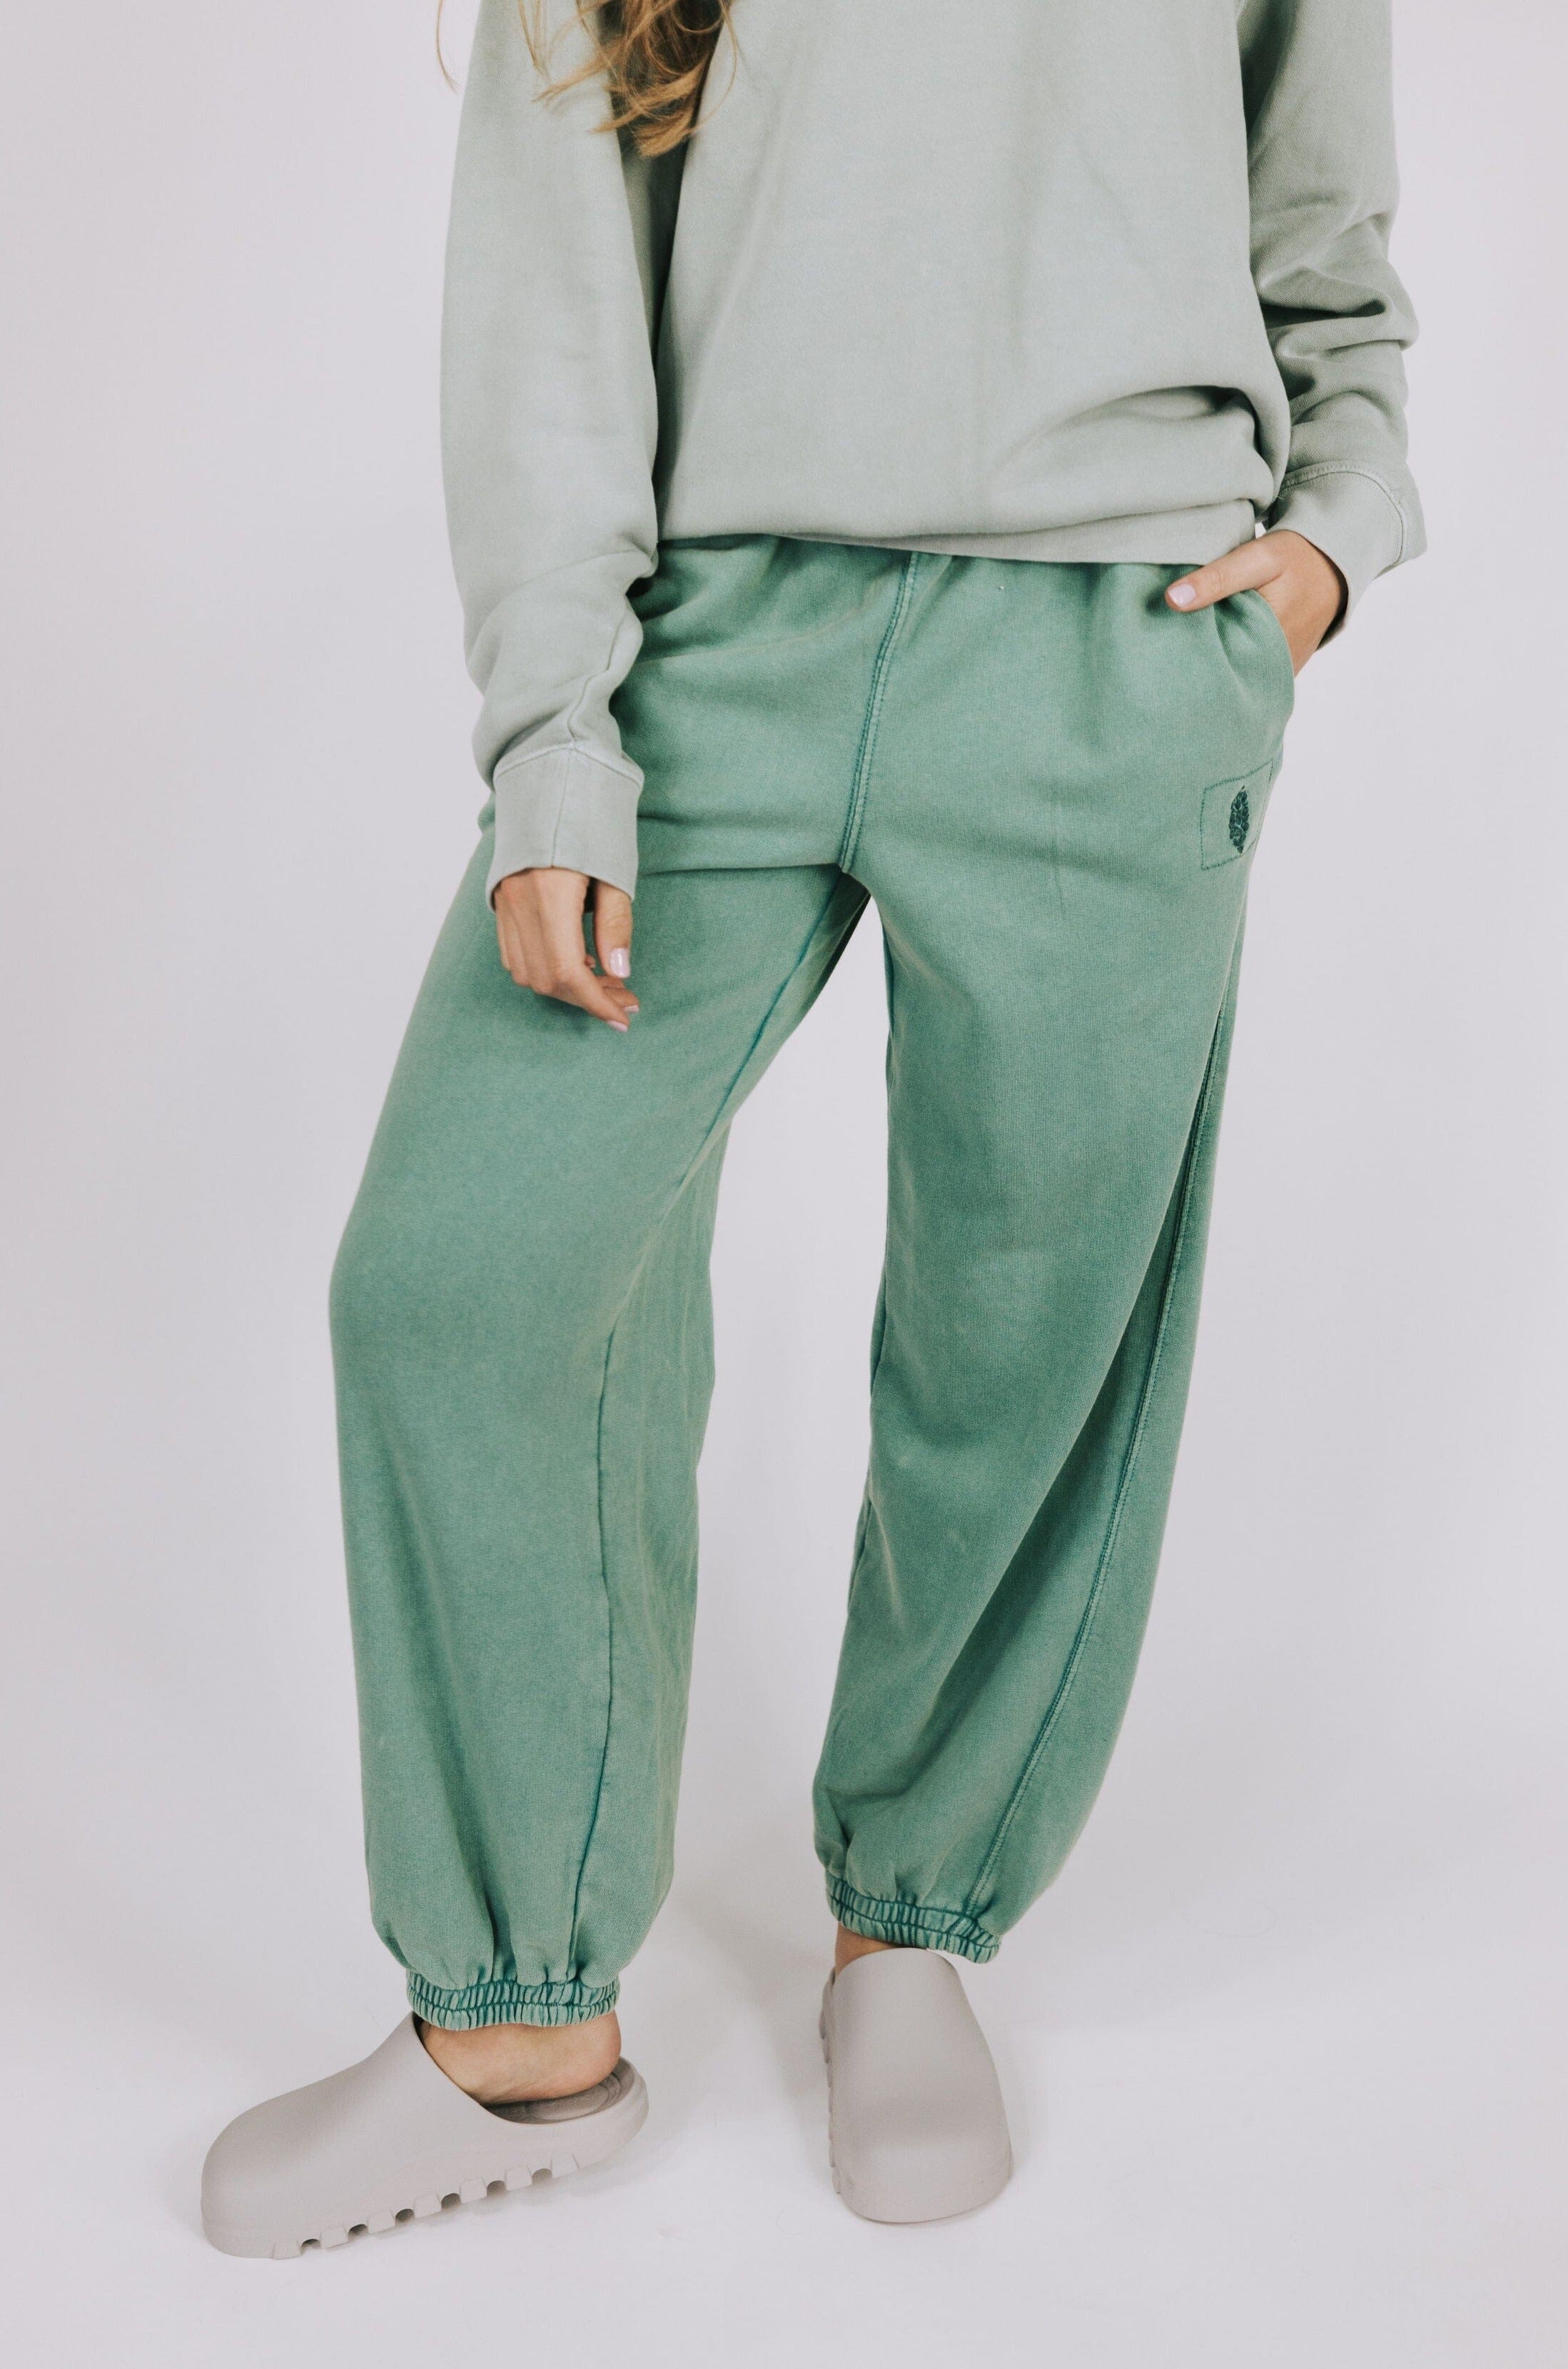 FREE PEOPLE - All Star Pants